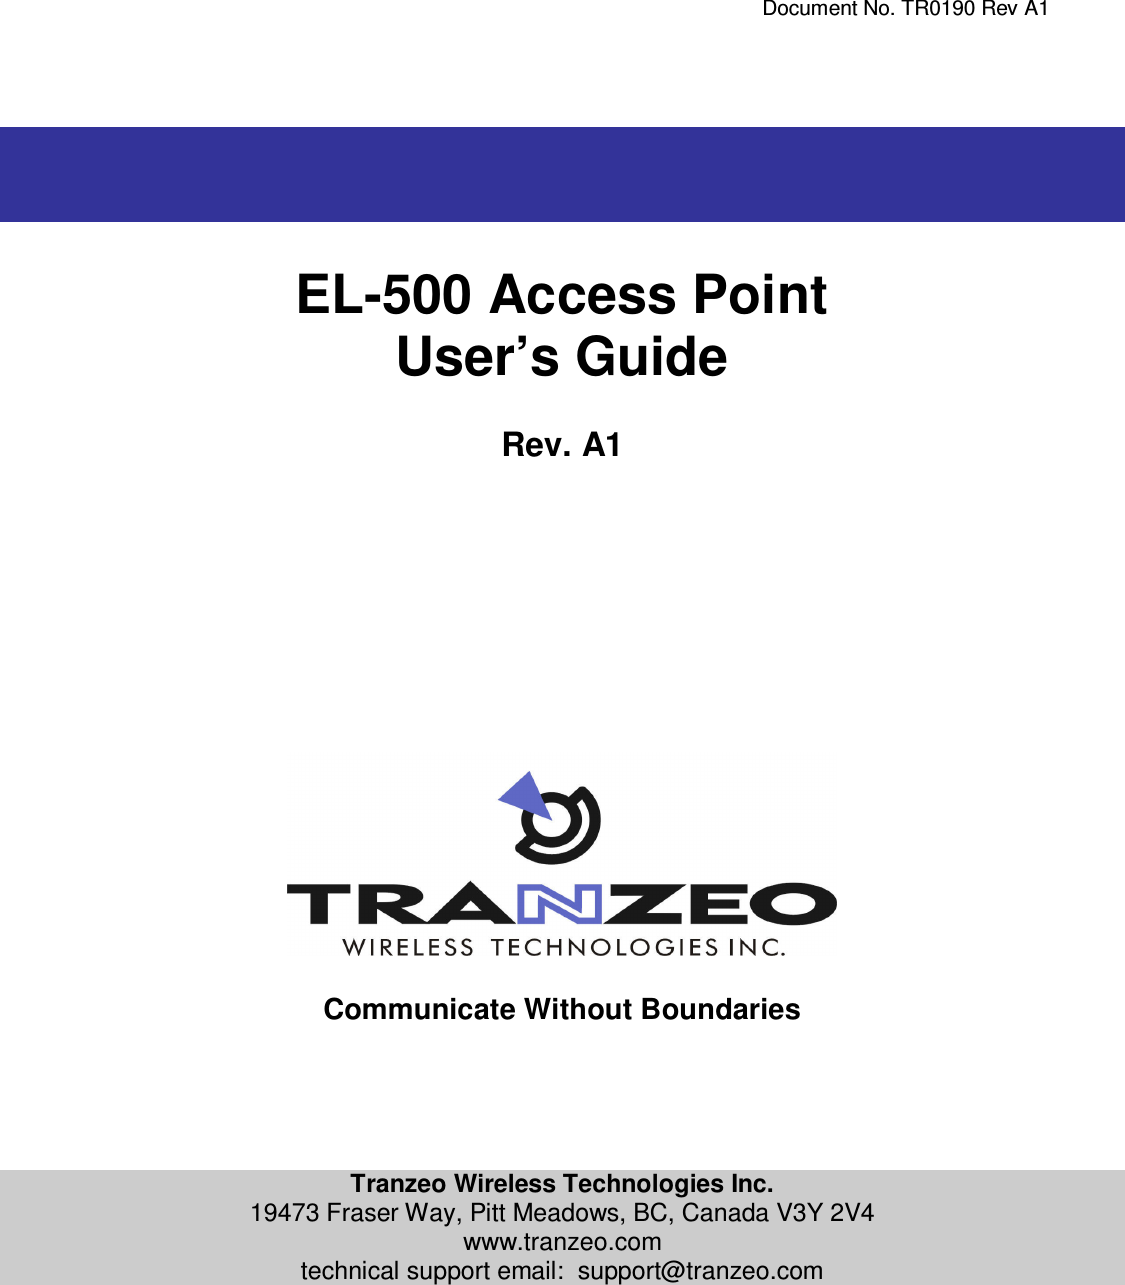     Document No. TR0190 Rev A1     EL-500 Access Point User’s Guide  Rev. A1                   Communicate Without Boundaries      Tranzeo Wireless Technologies Inc. 19473 Fraser Way, Pitt Meadows, BC, Canada V3Y 2V4 www.tranzeo.com technical support email:  support@tranzeo.com   